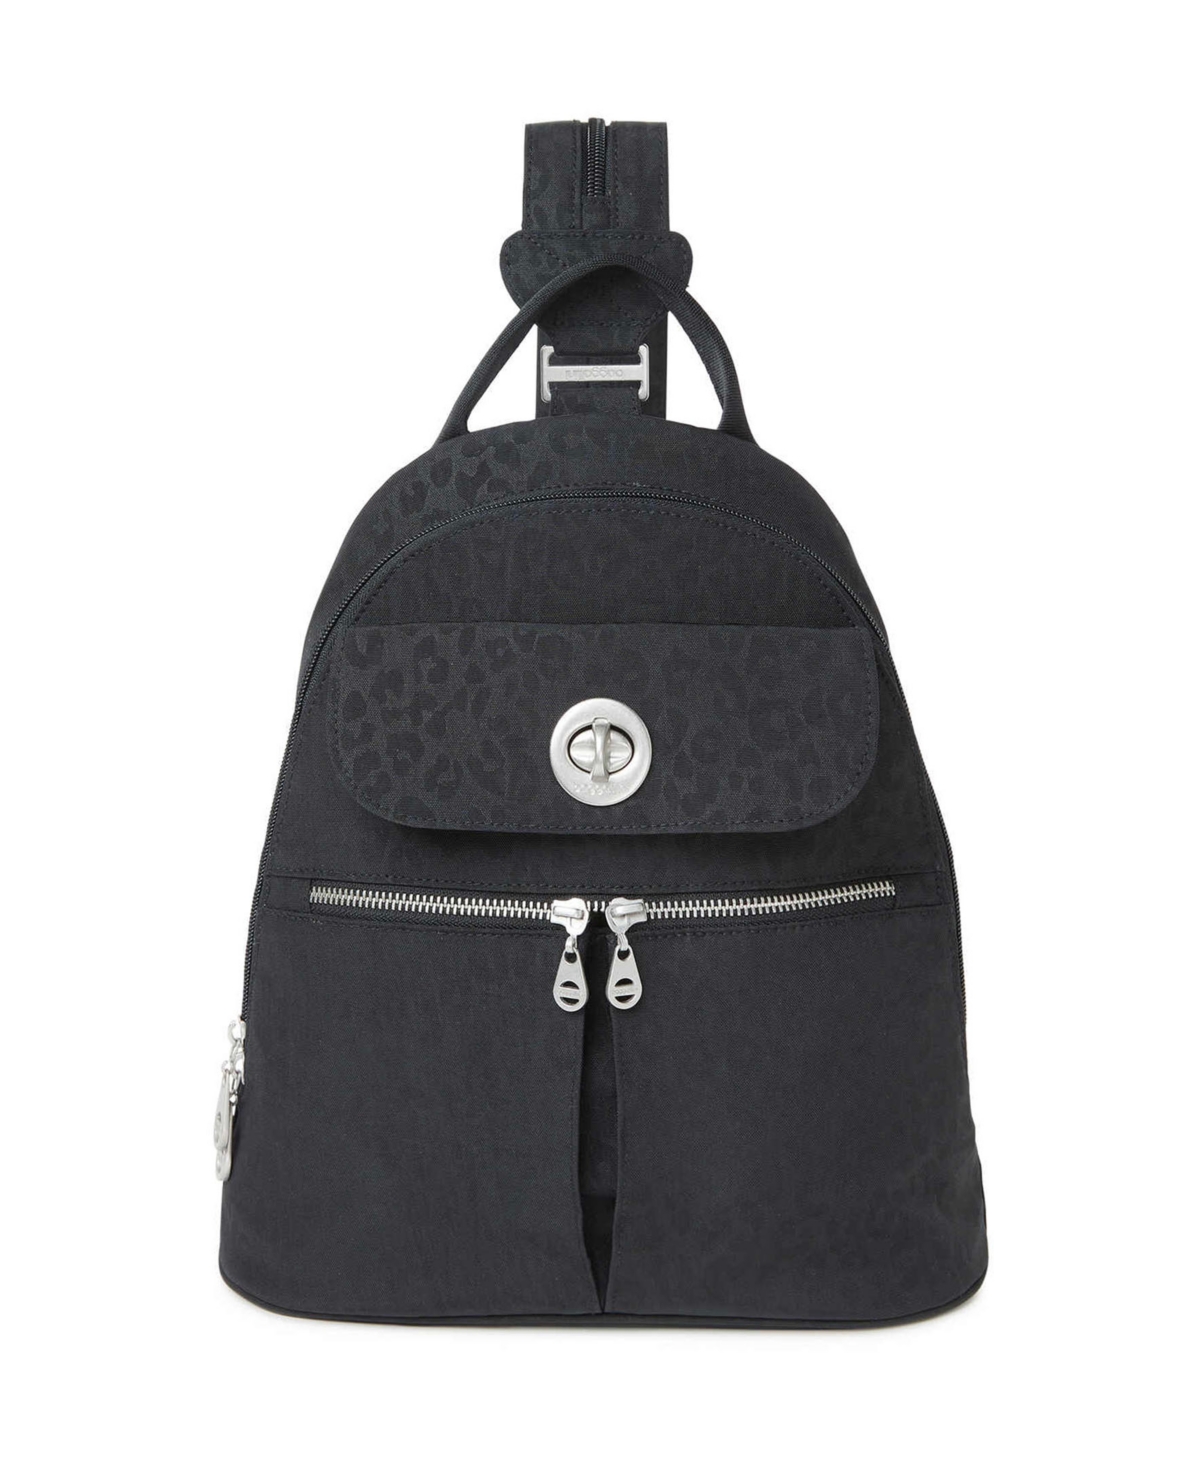 Naples Convertible Backpack - Midnight Blossom